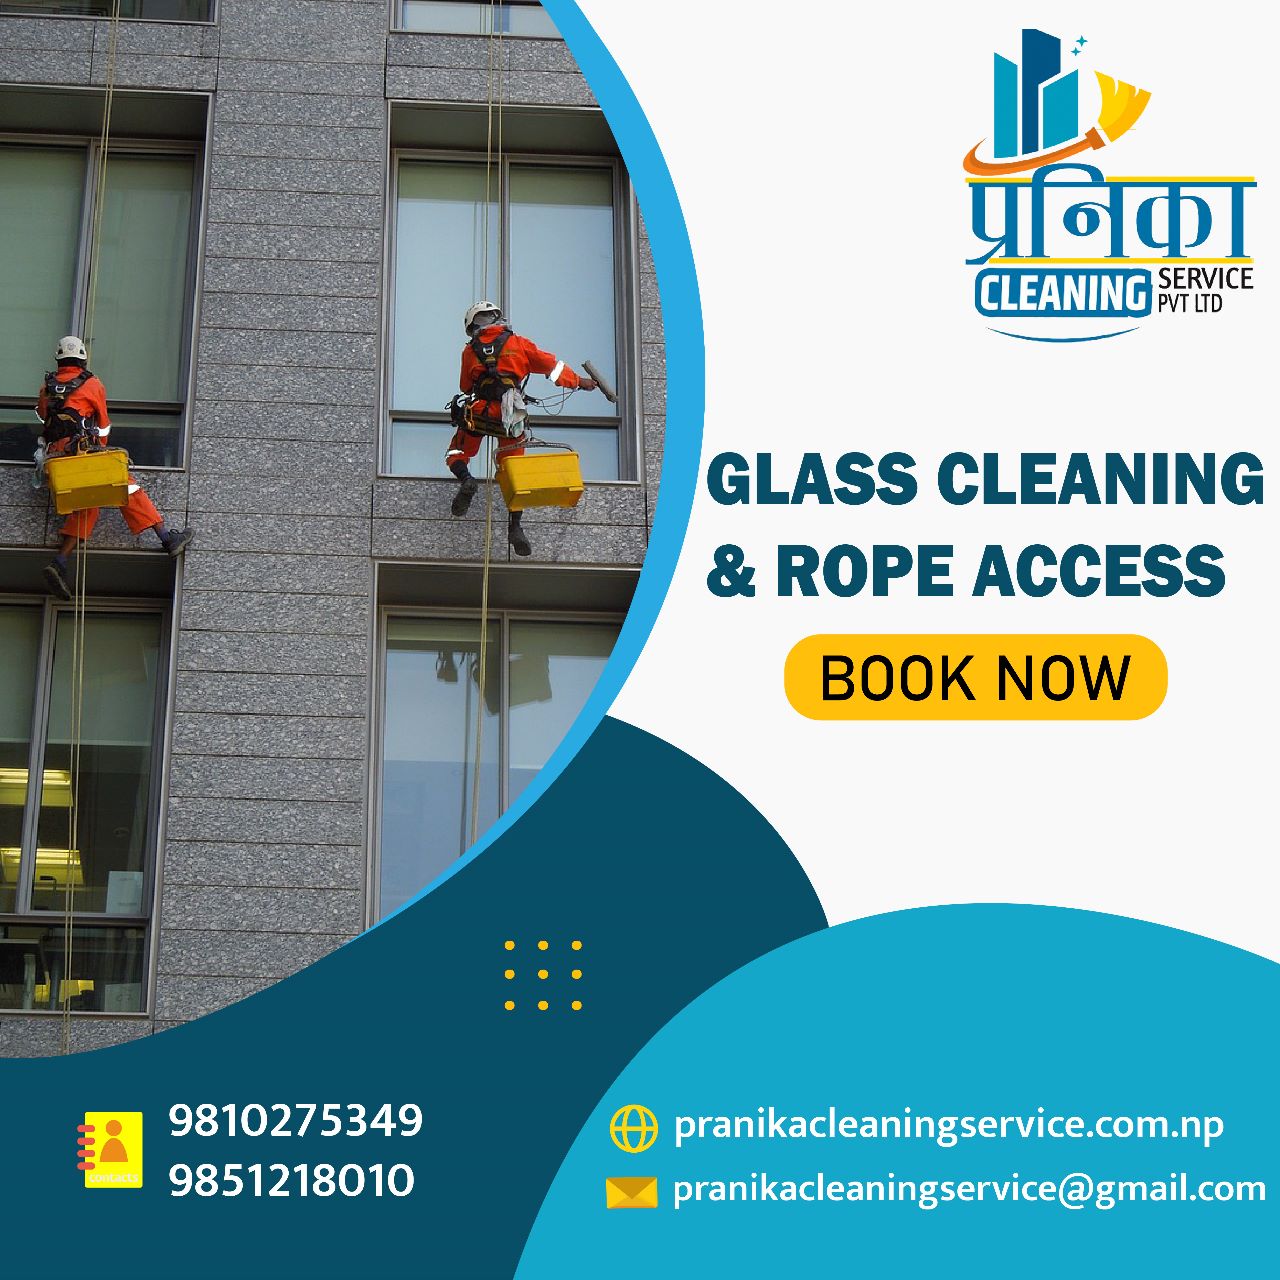 Glass Cleaning & Rope Access